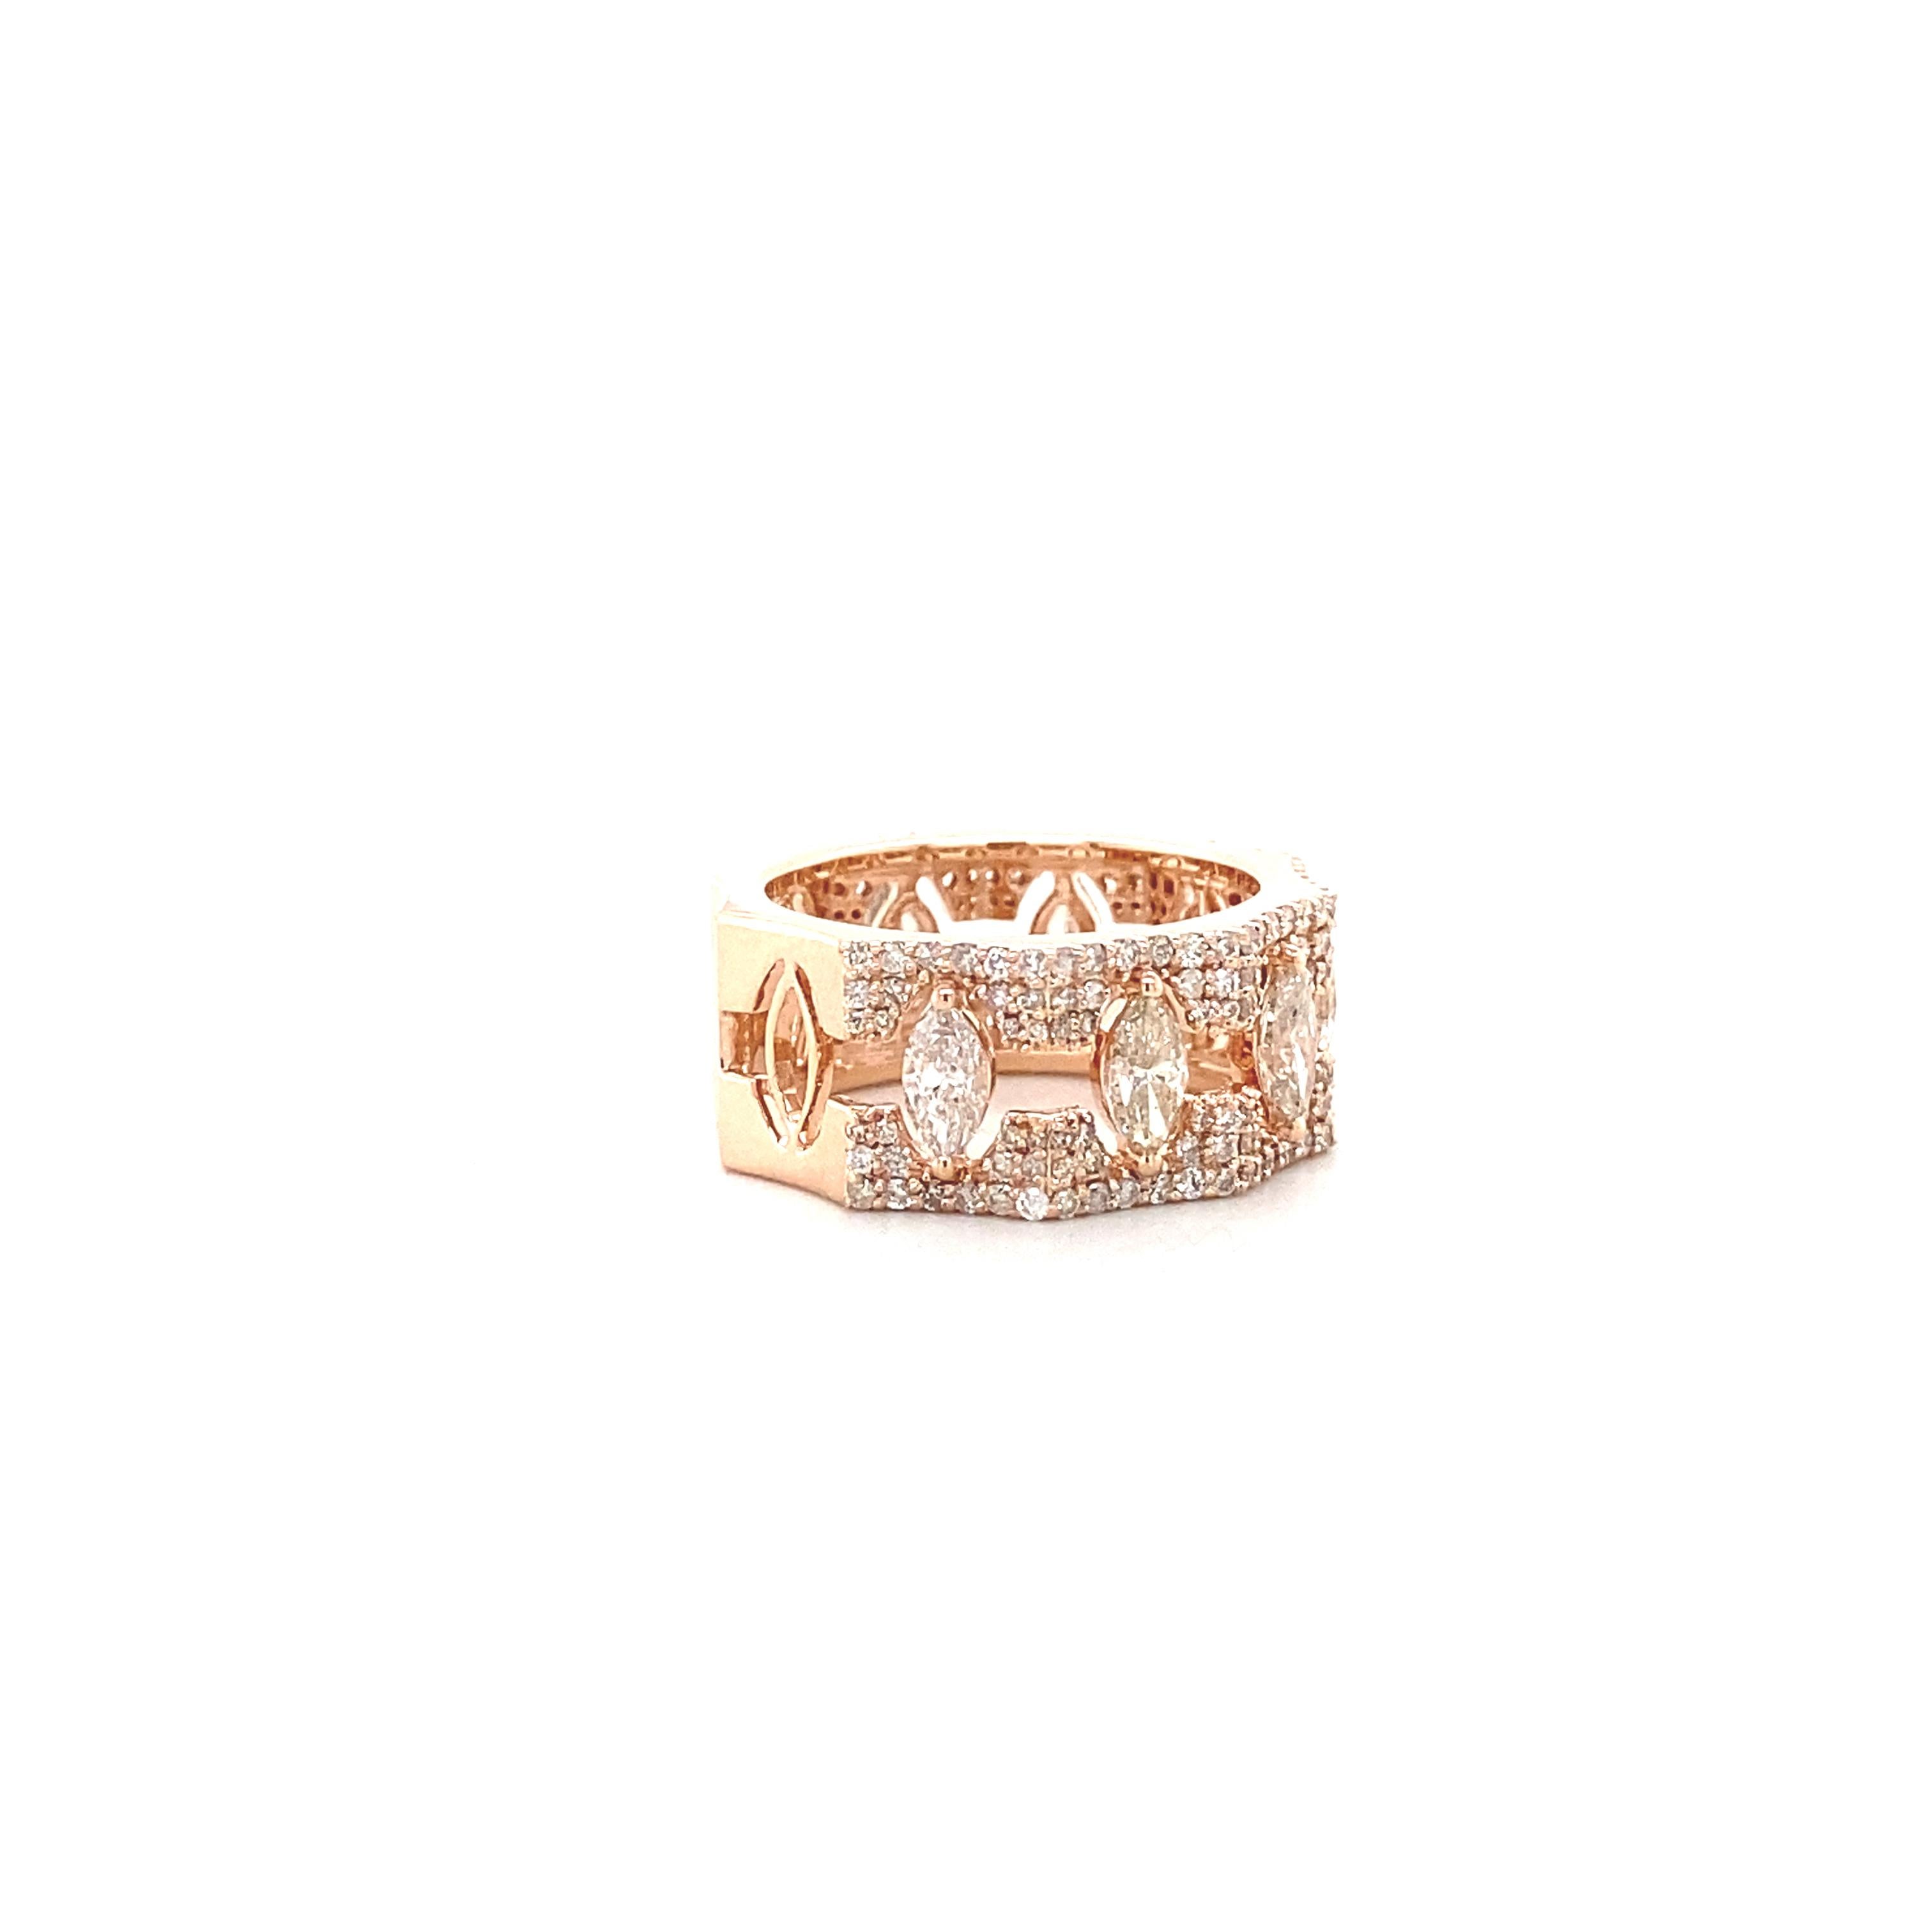 The ring is a testament to timeless beauty and luxurious elegance. Fashioned from 18K solid gold, its band presents a substantial weight and feel, indicative of its premium quality. The ring is encrusted with a breathtaking array of marquise and